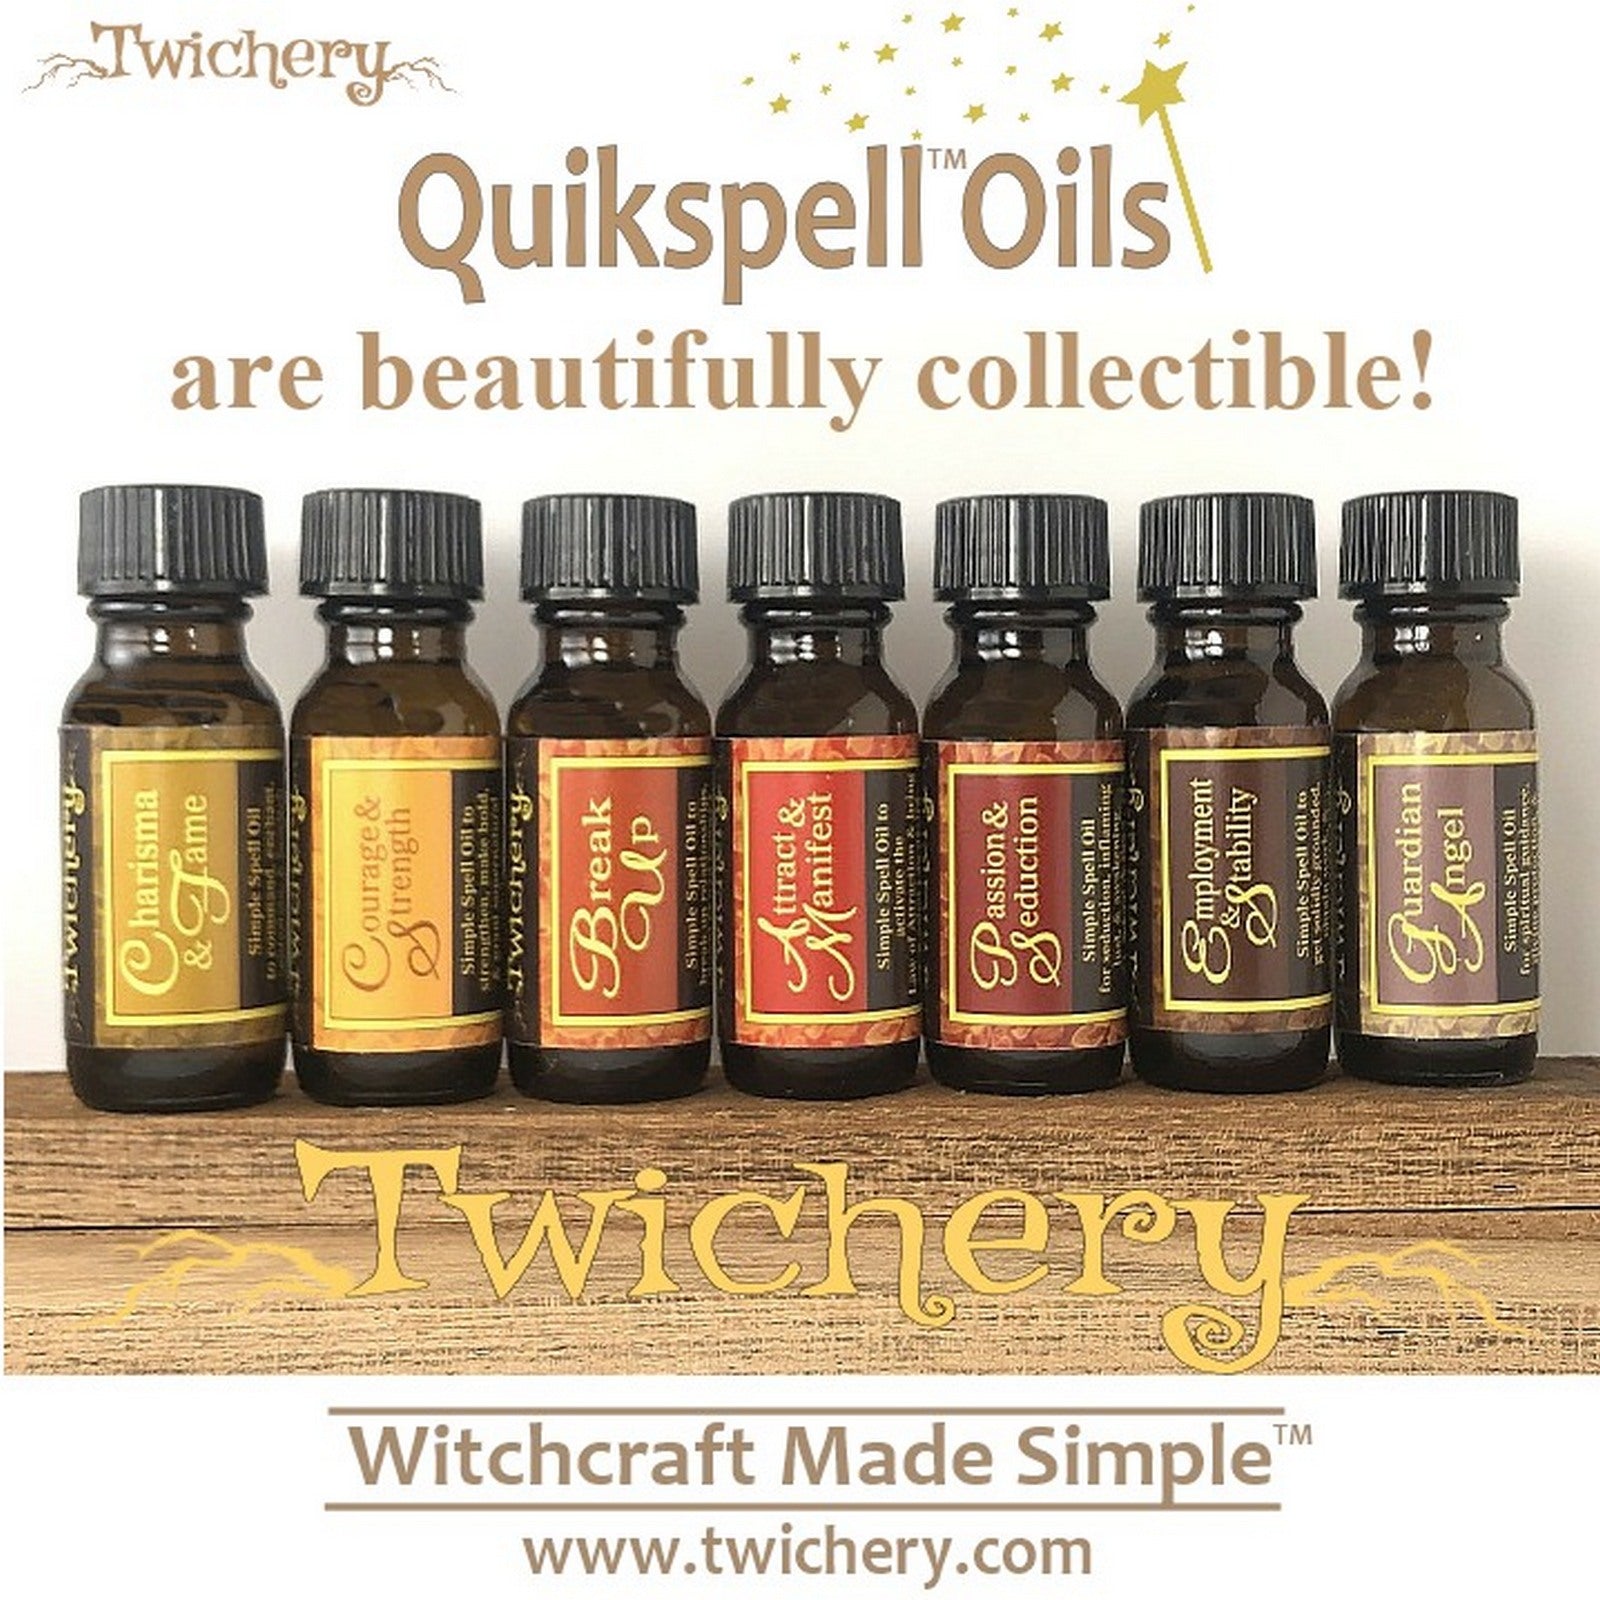 Collect all 24 Twichery Quikspell Oils for all your magickal needs, including dealing with legal troubles. Luck with the Law and Police. Hoodoo, Voodoo, Wicca, Witchcraft Made Simple